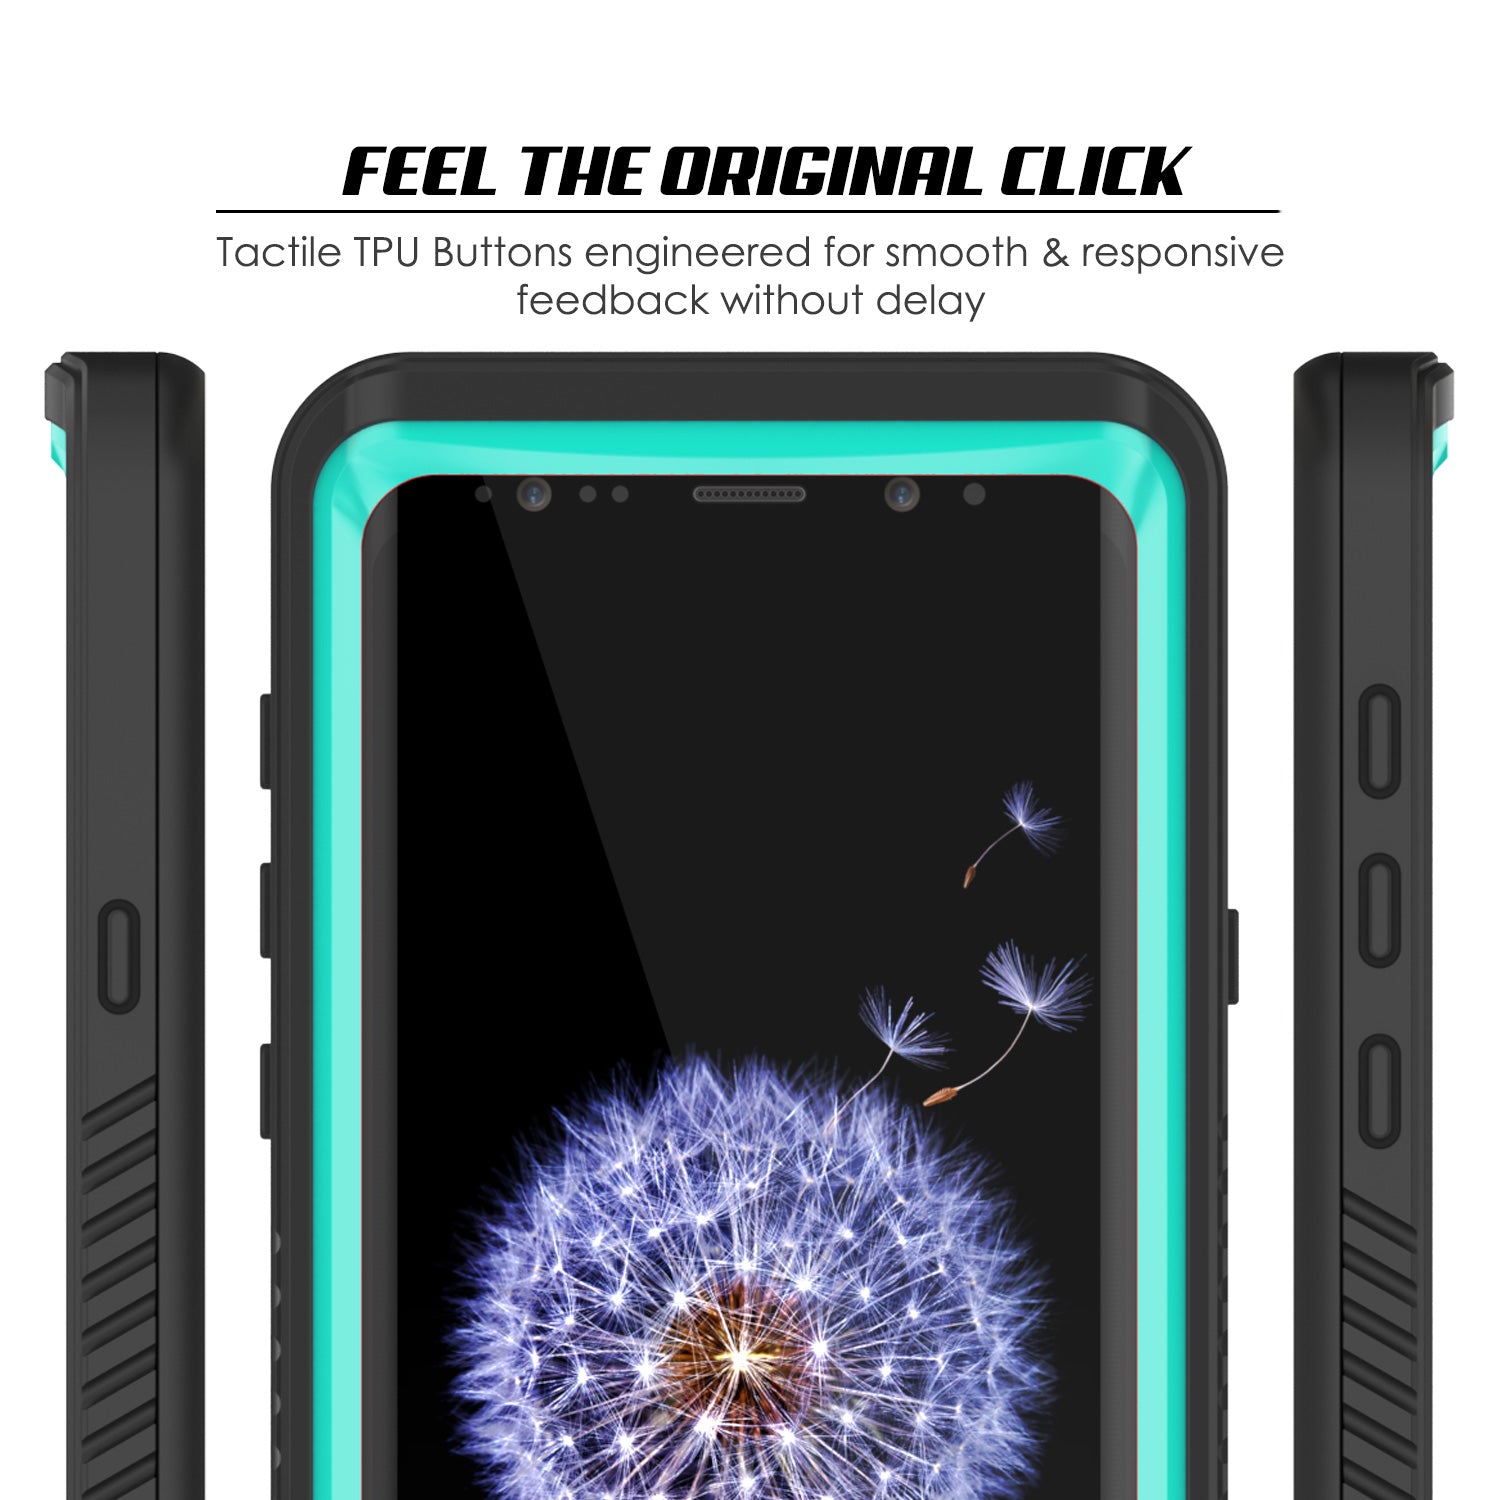 Galaxy S9 Plus Water/Shock/Snowproof | Screen Protector Case [Teal]